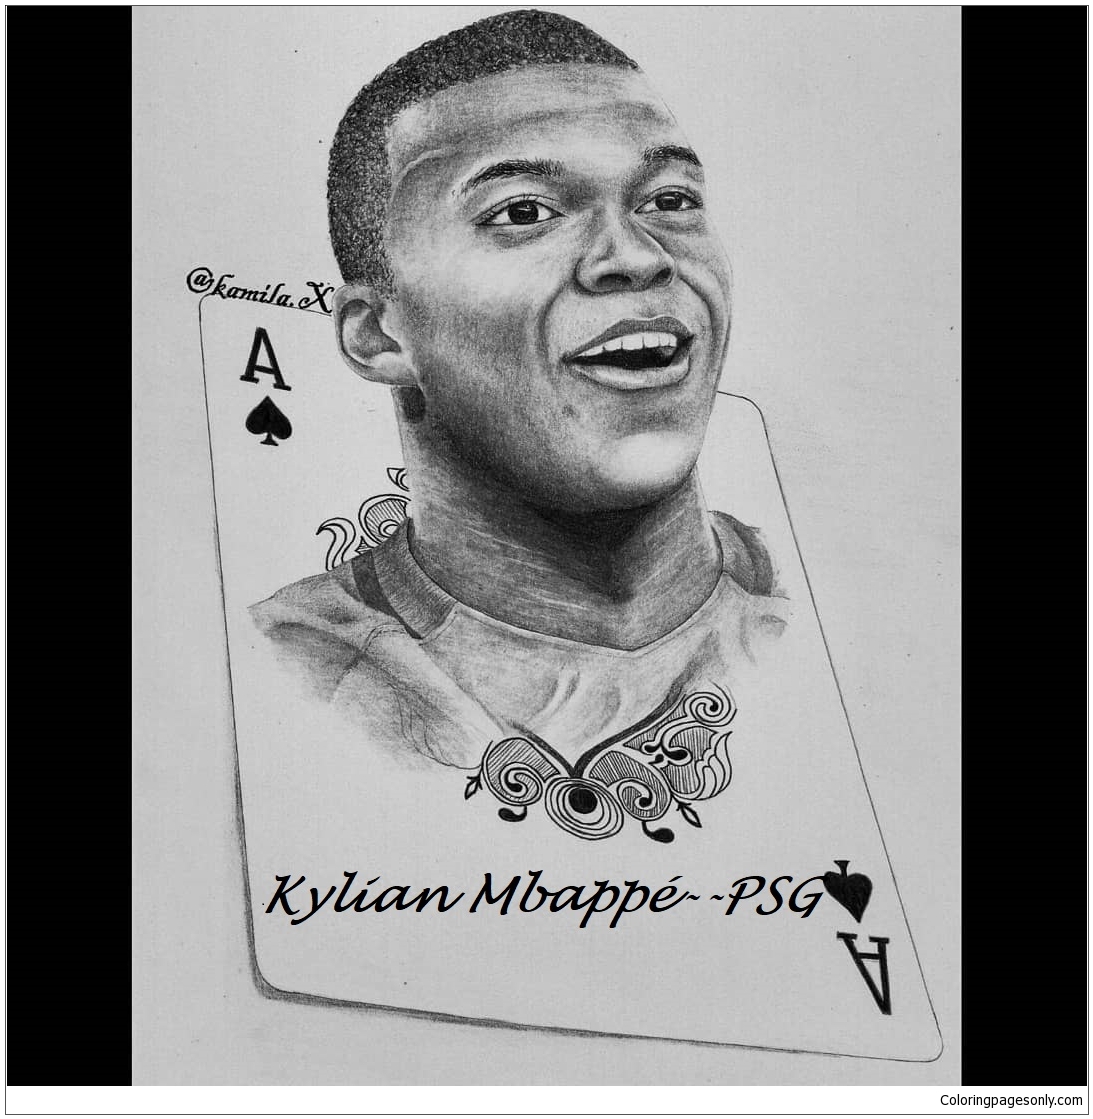 Download Kylian Mbappé-image 5 Coloring Page - Free Coloring Pages Online